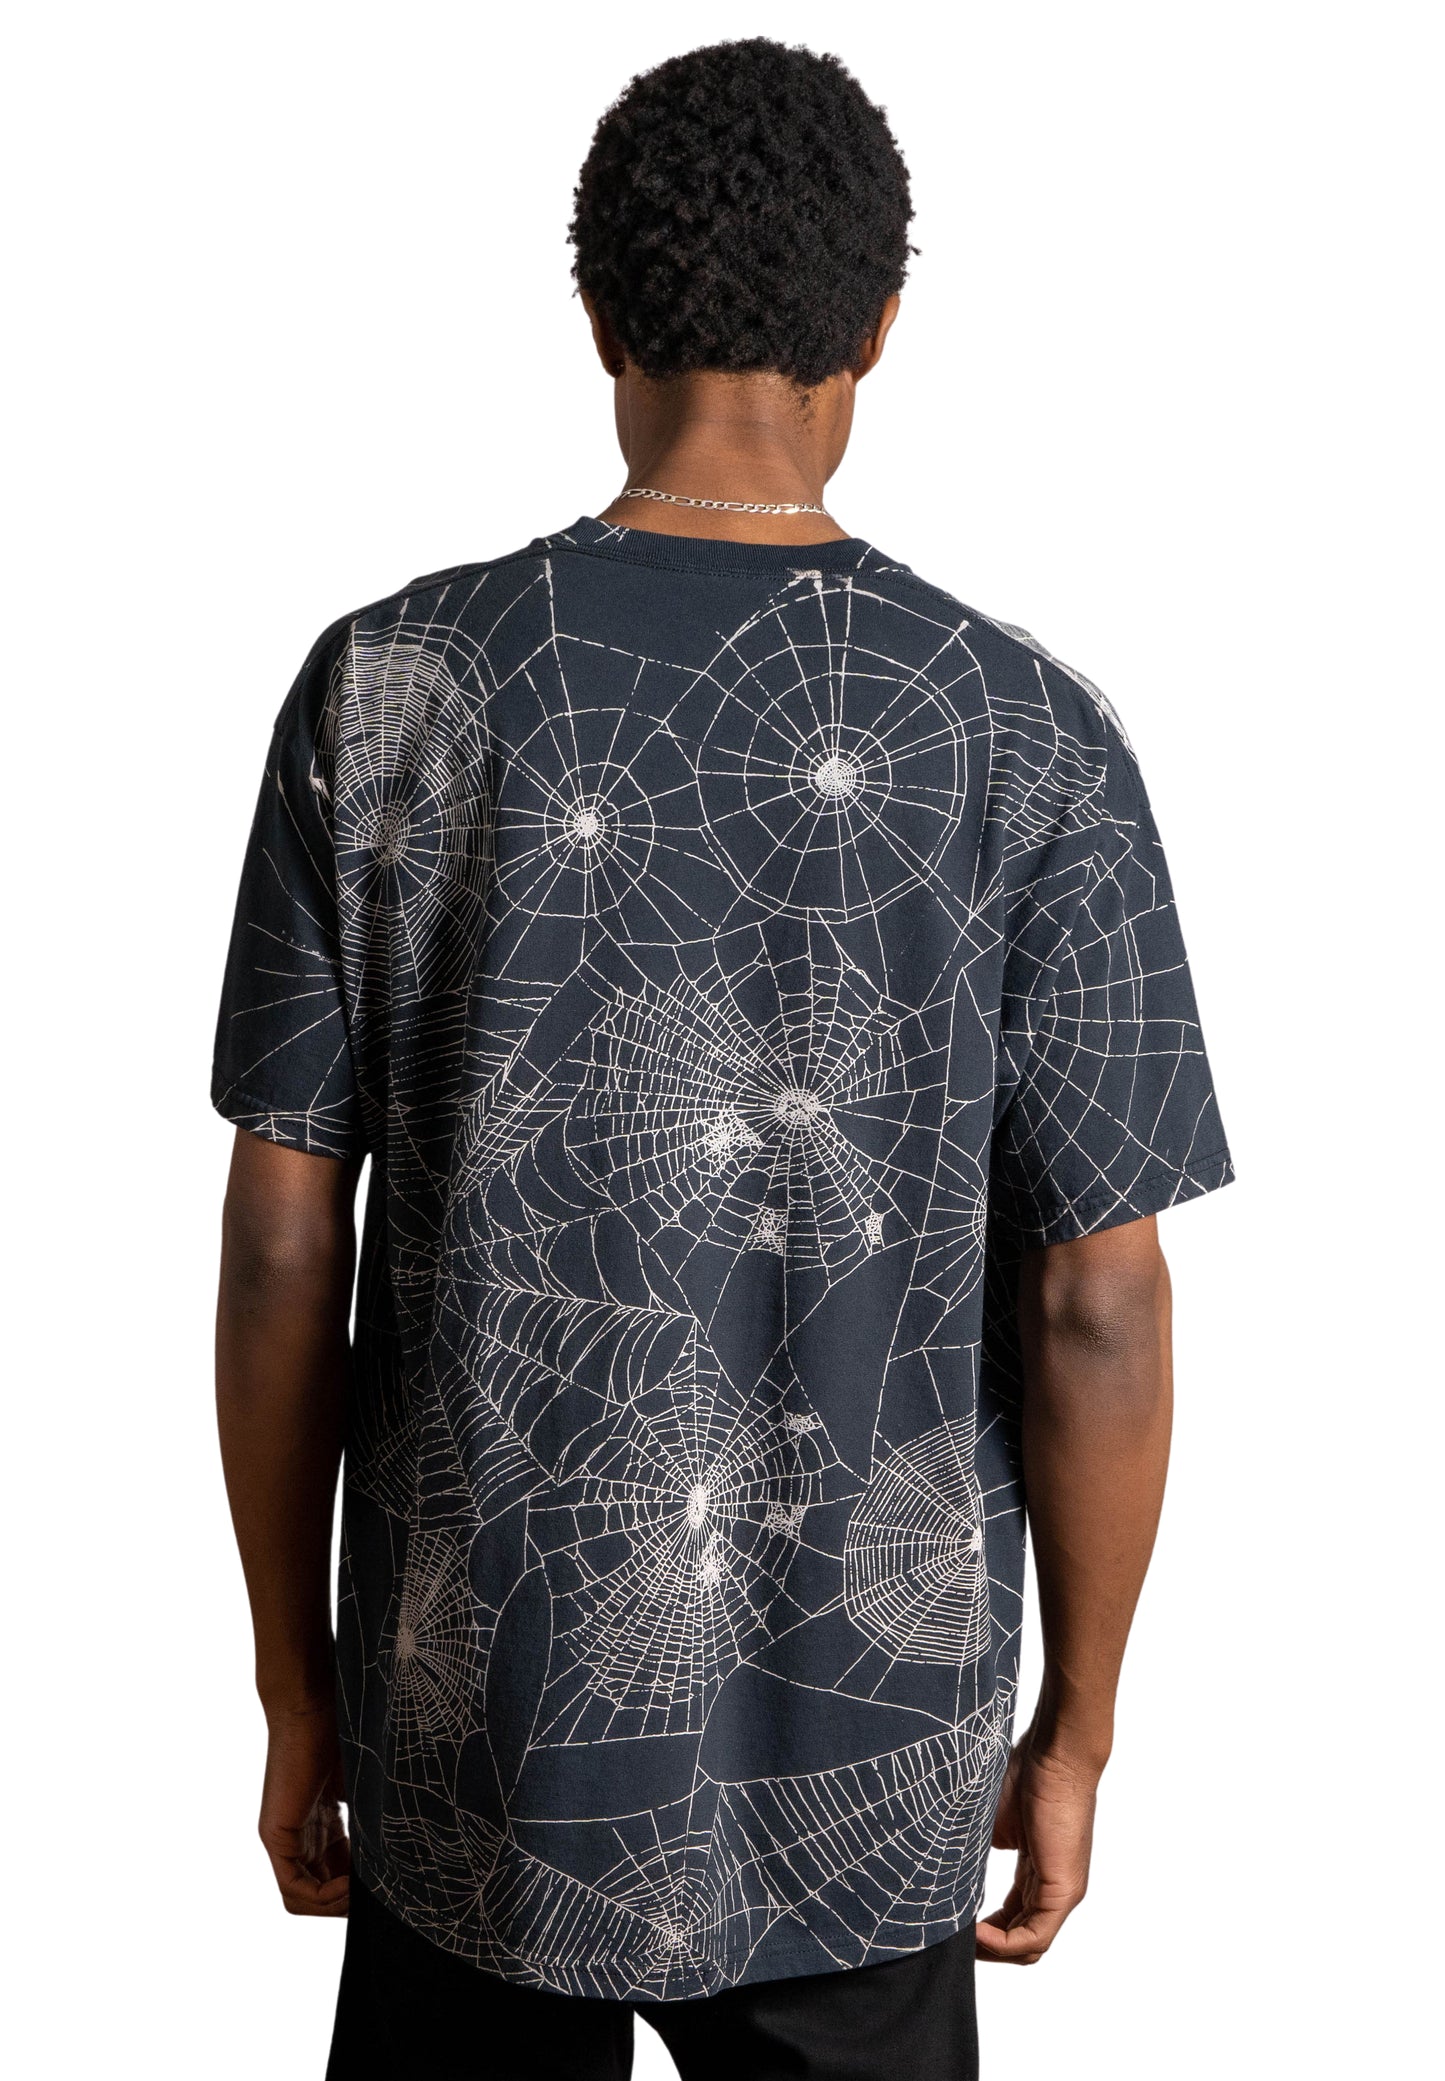 Vintage 1990’s All Over Print Spider Web T-Shirt